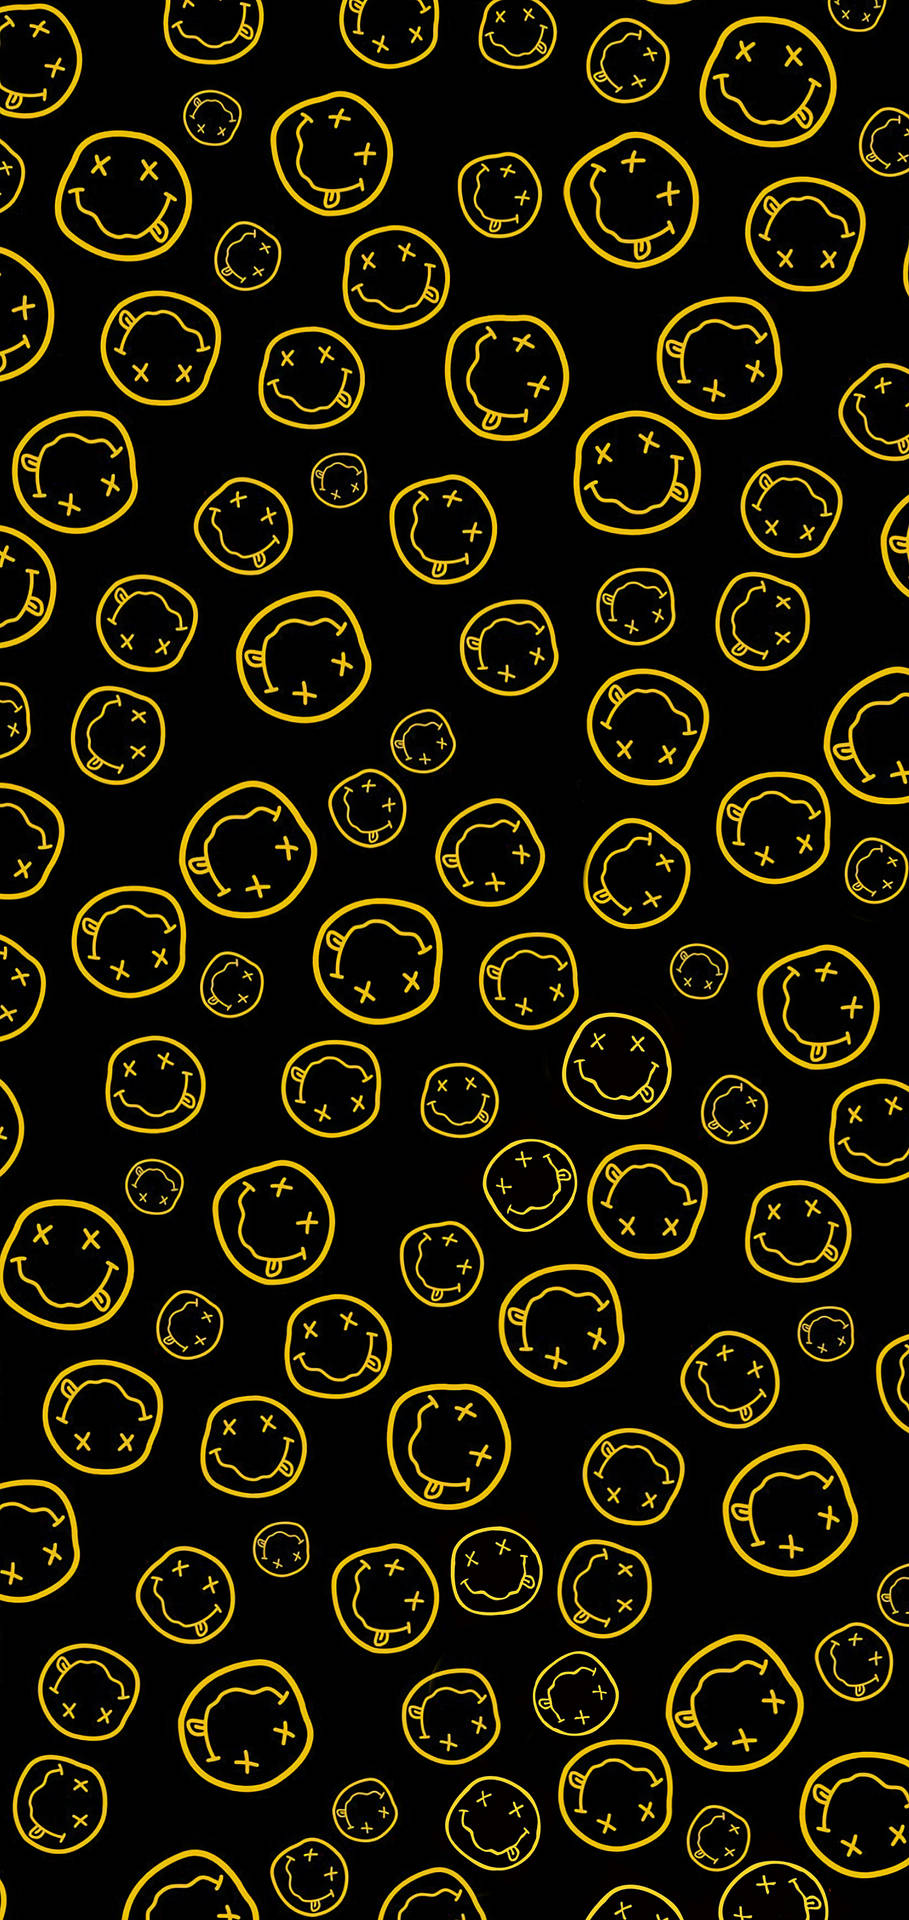 Iconic Nirvana Smiley Face Wallpaper